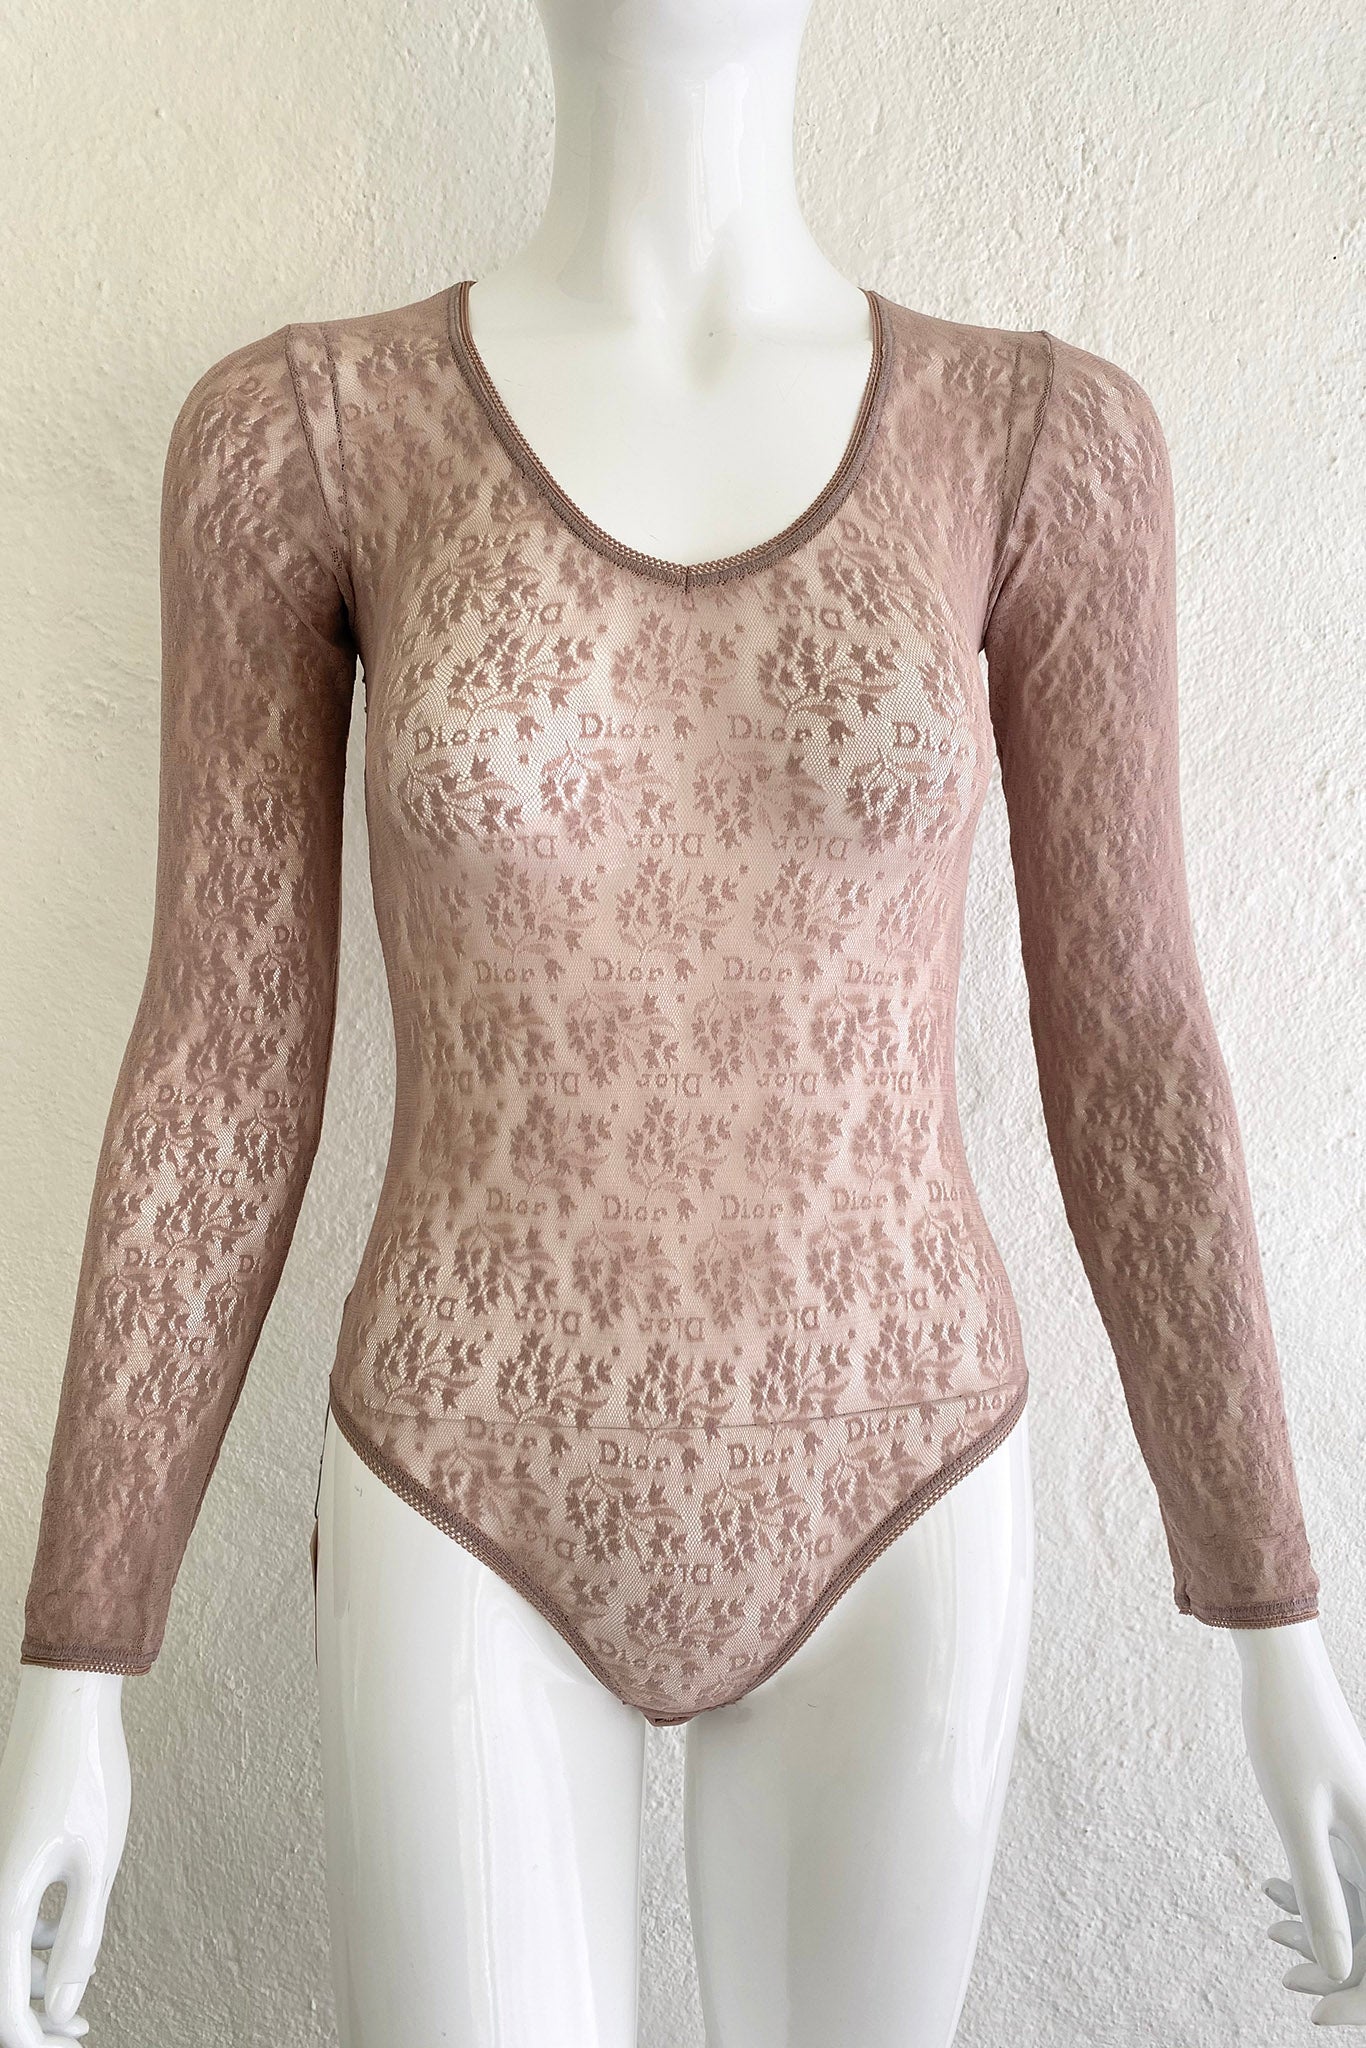 Vintage Christian Dior Deadstock Sheer Lace Logo Bodysuit on Mannequin Front at Recess Los Angeles